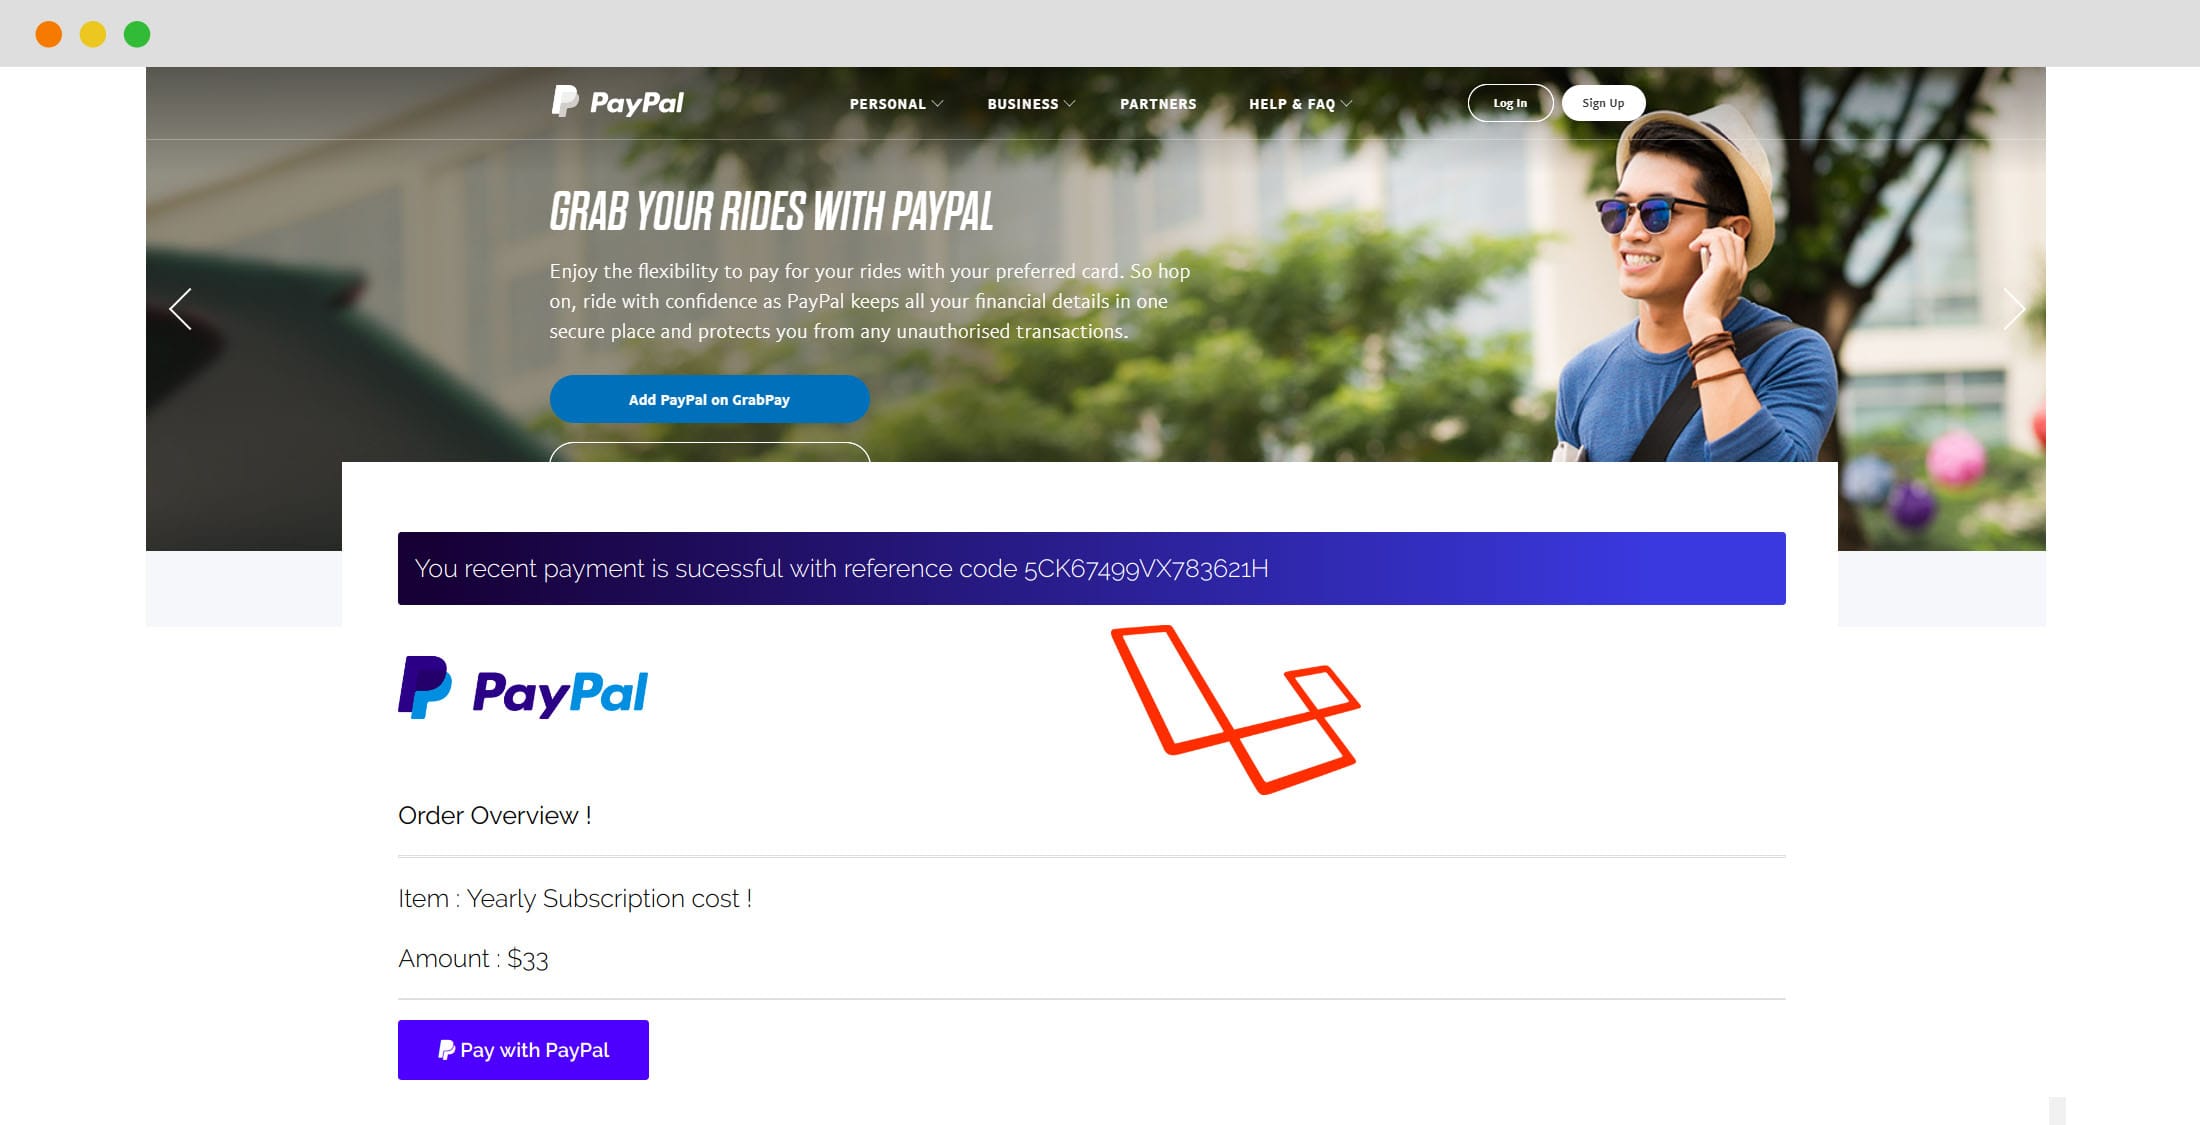 PayPal Integration with PHP